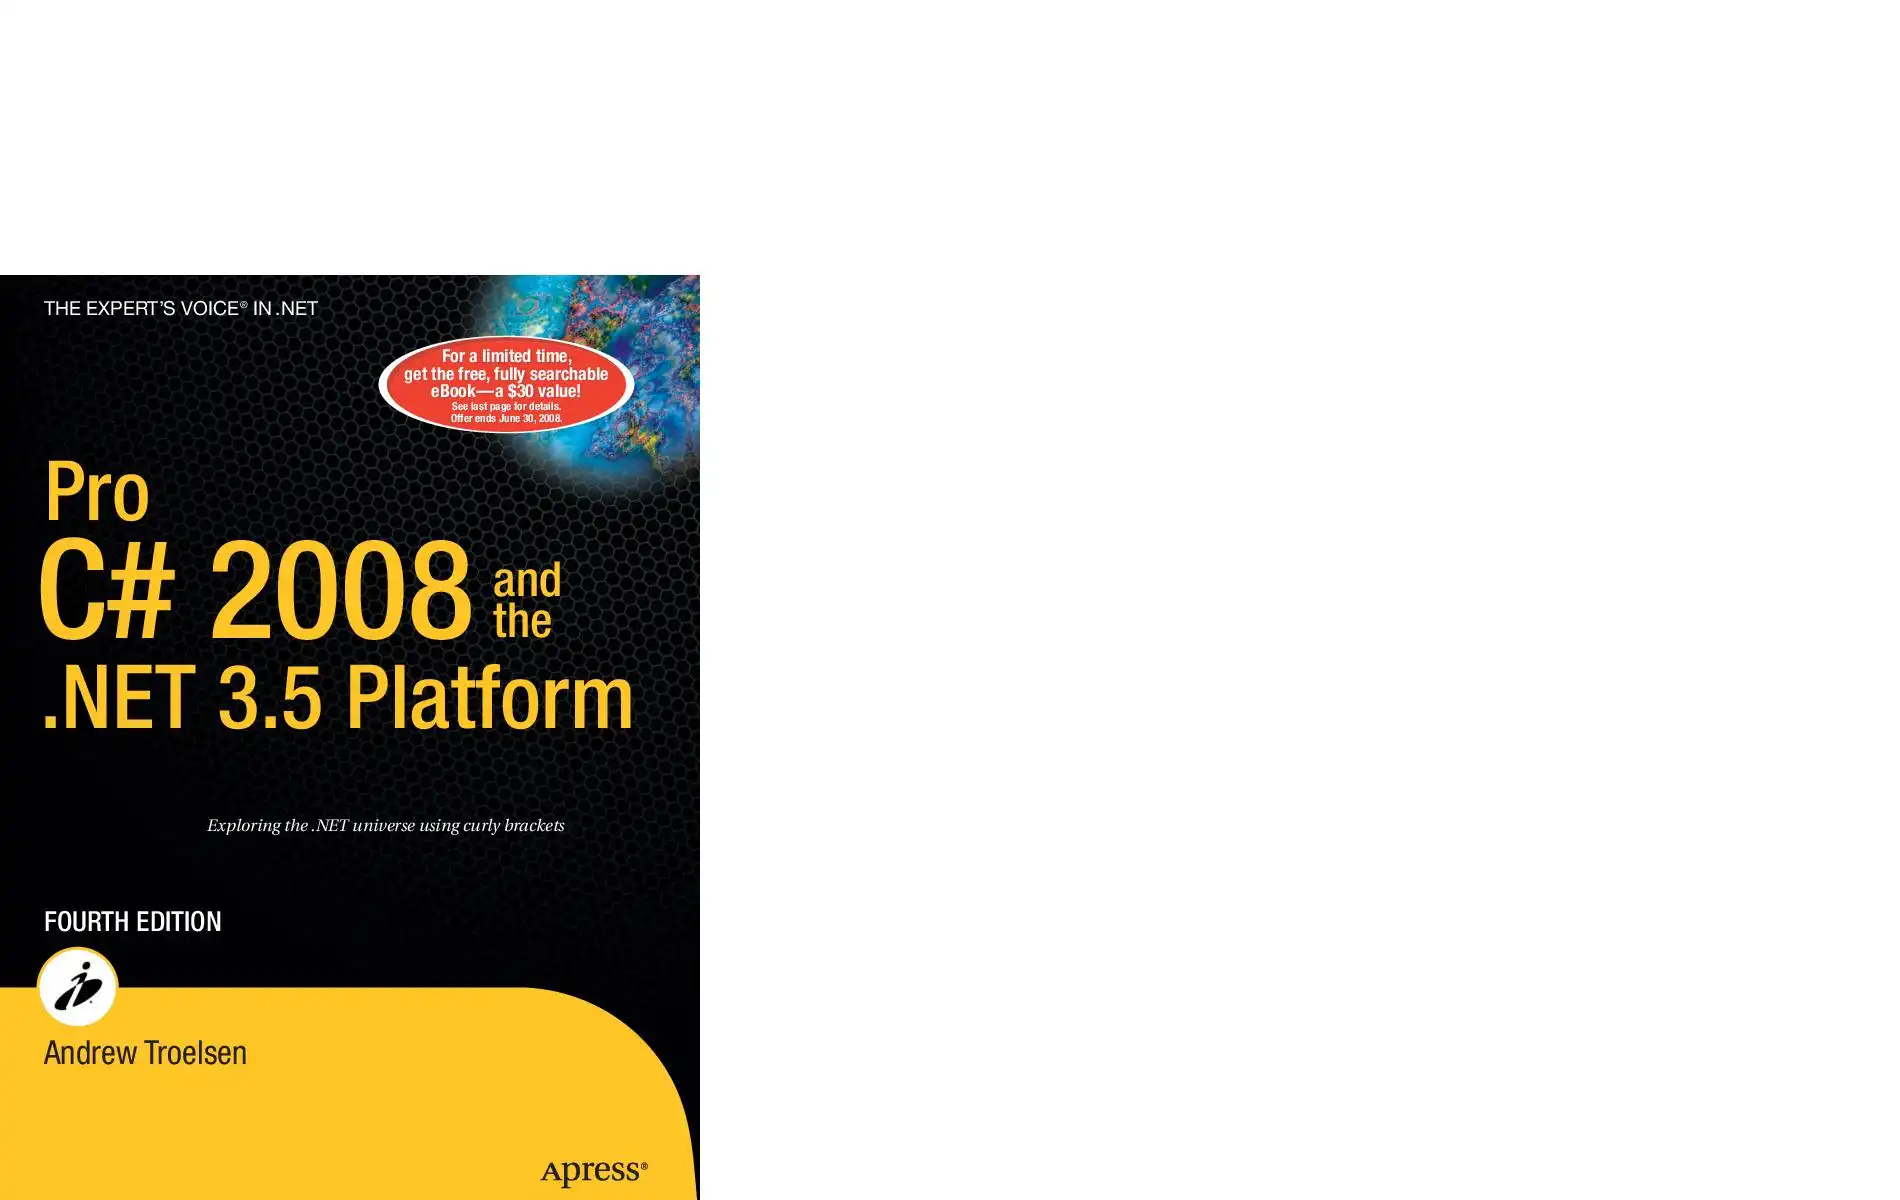 [book] [en] Pro C Sharp 2008 and the NET 3.5 Platform Fourth Edition